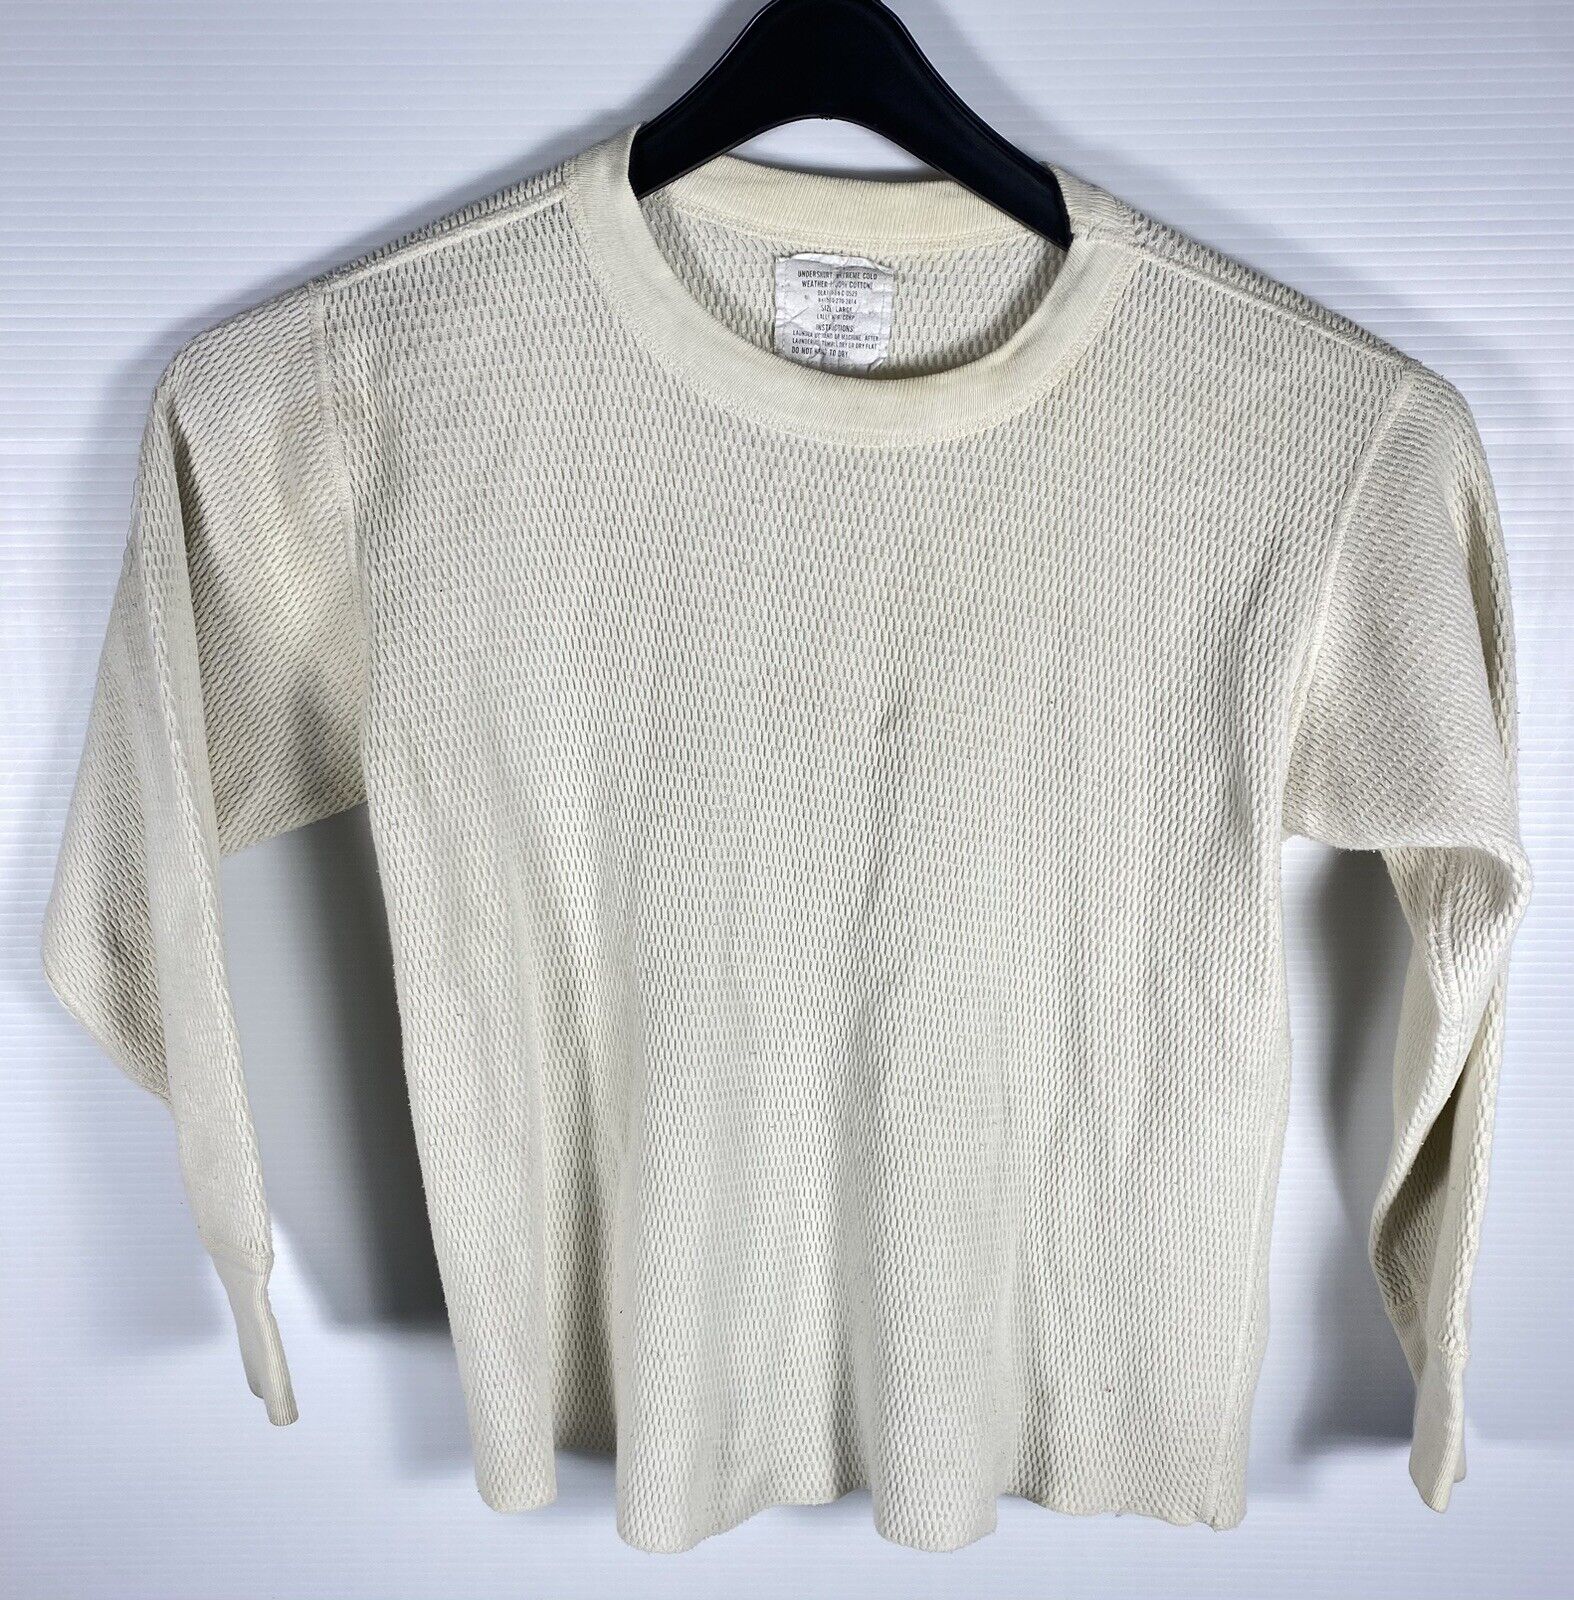 Vtg 1990 Military Thermal Undershirt Extreme Cold Weather Cream 100% Cotton Sz L